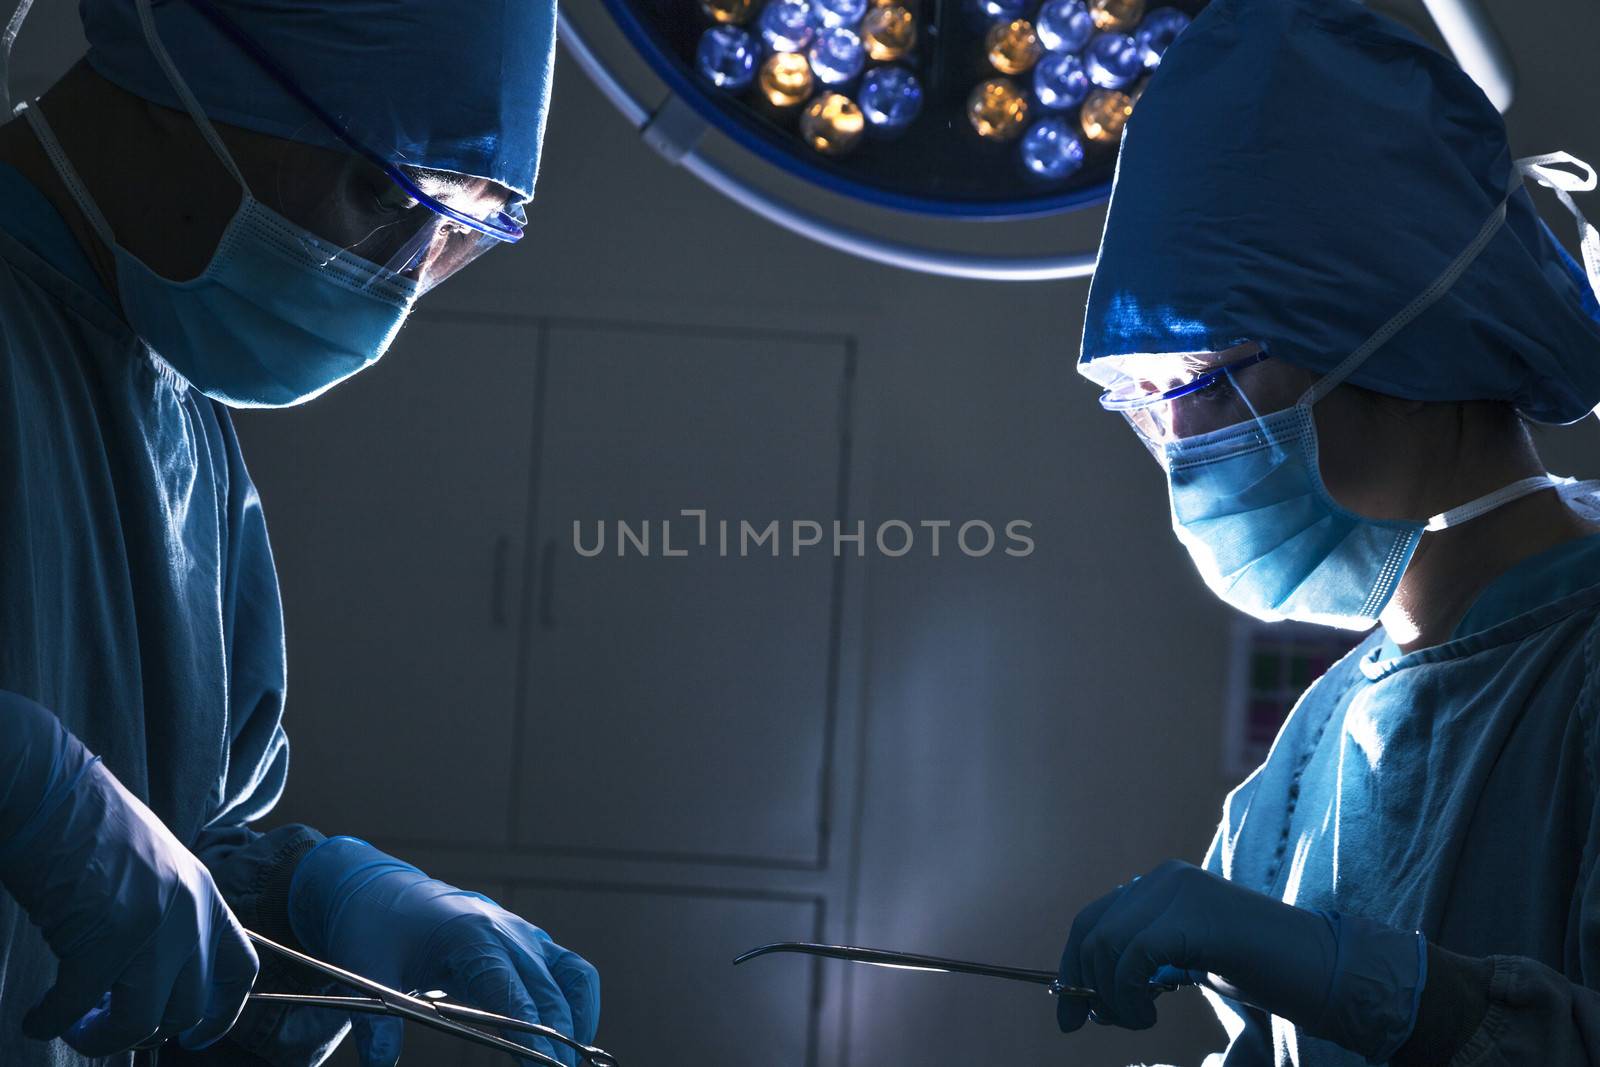 Two surgeons looking down and working at the operating table, dark operating room